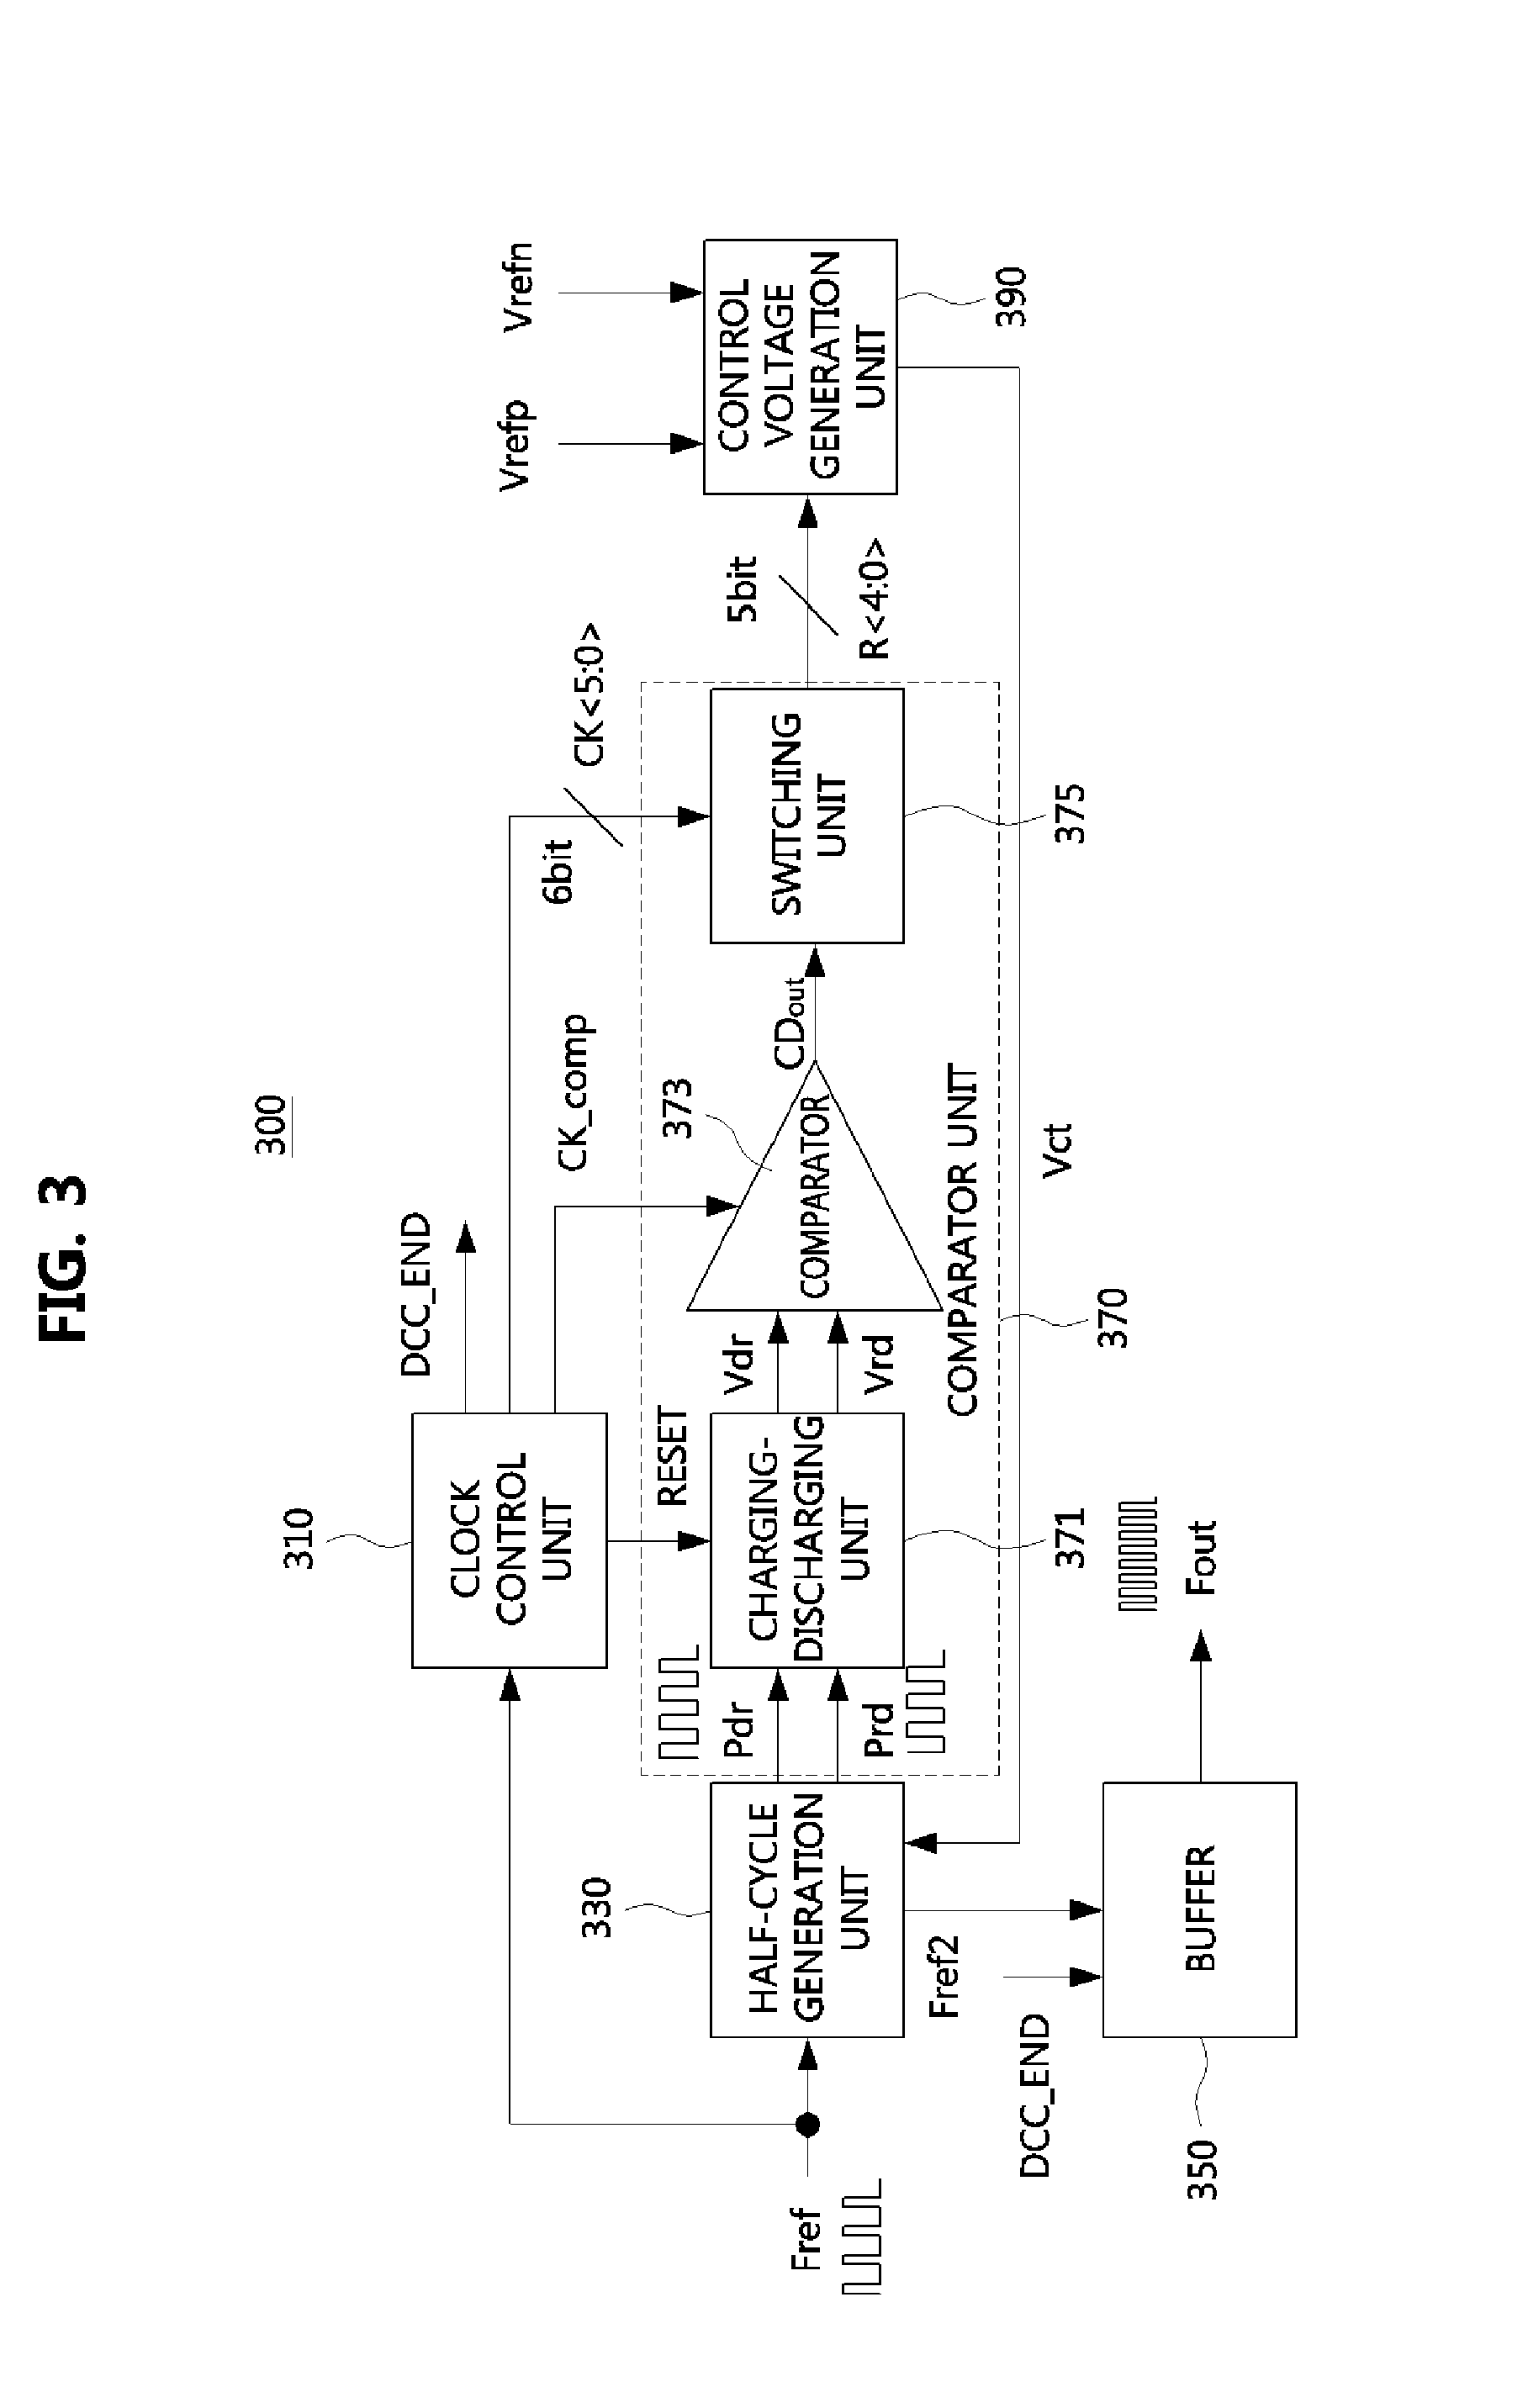 Apparatus for controlling duty ratio of signal